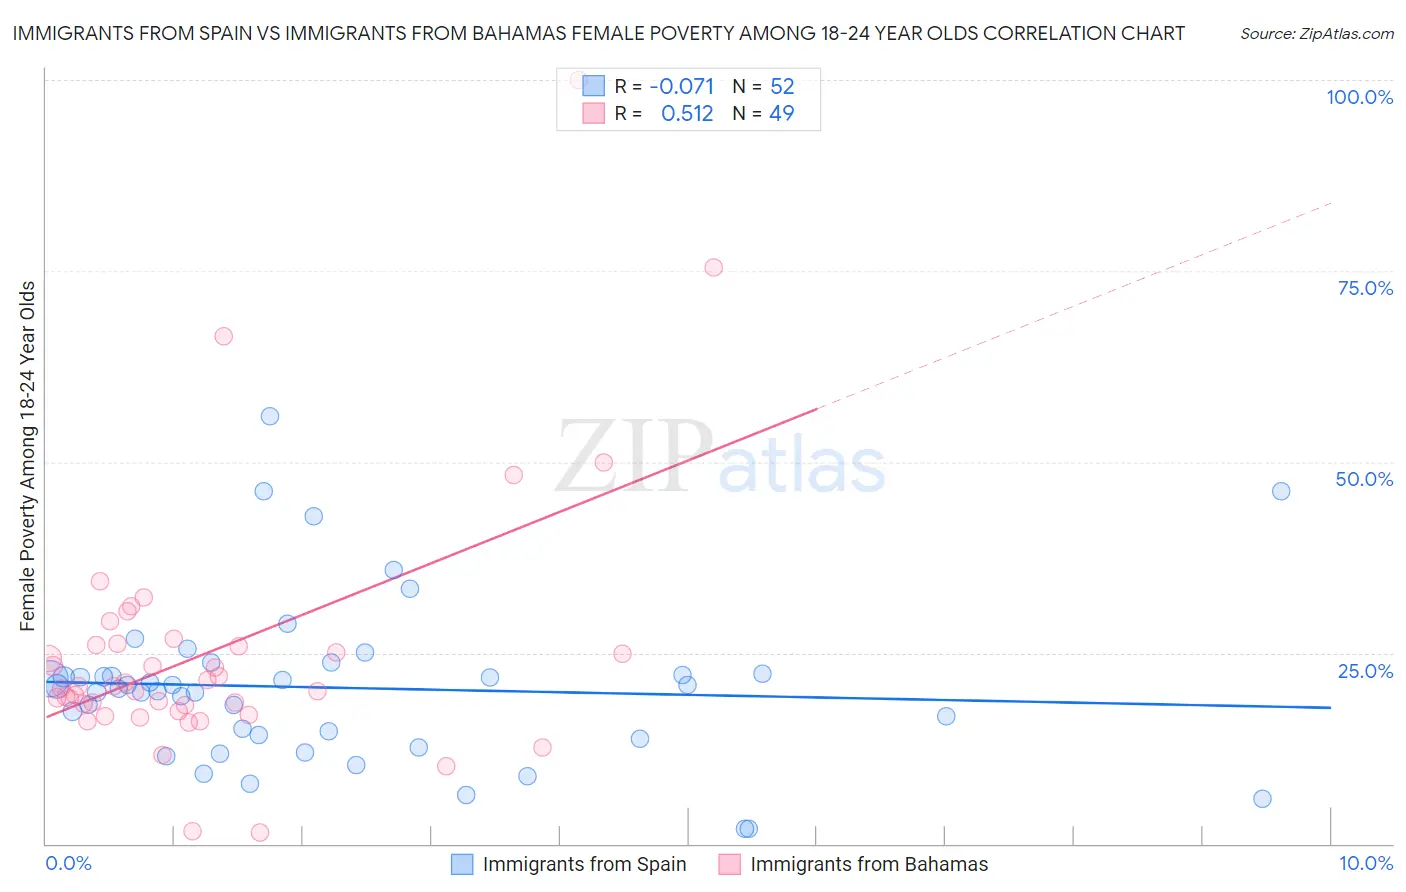 Immigrants from Spain vs Immigrants from Bahamas Female Poverty Among 18-24 Year Olds